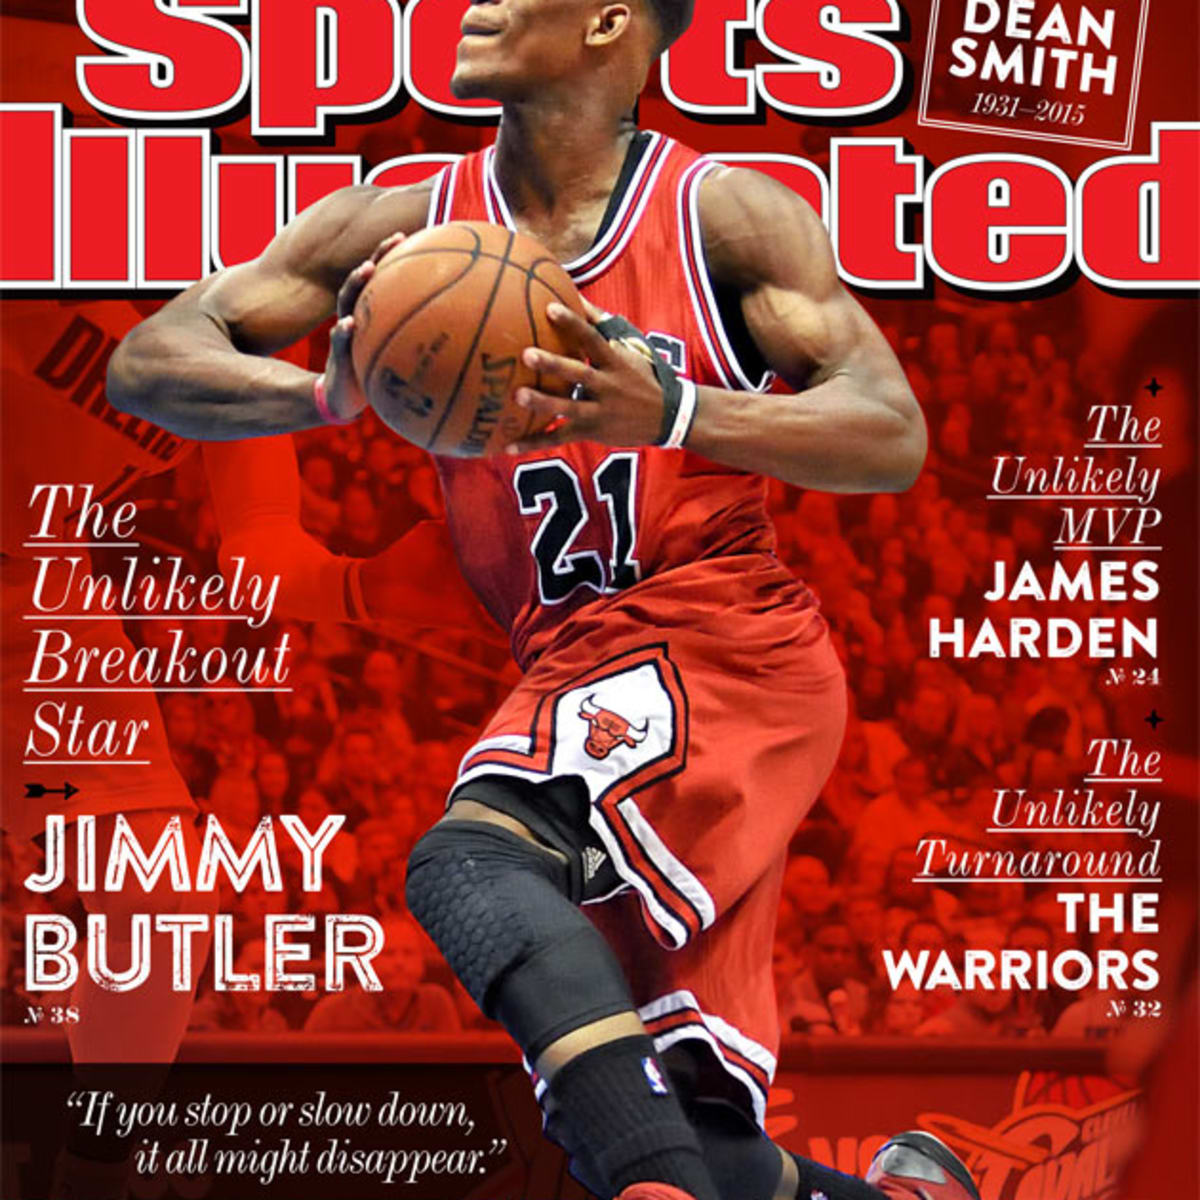 A Career In Photos, Jimmy Butler Photo Gallery